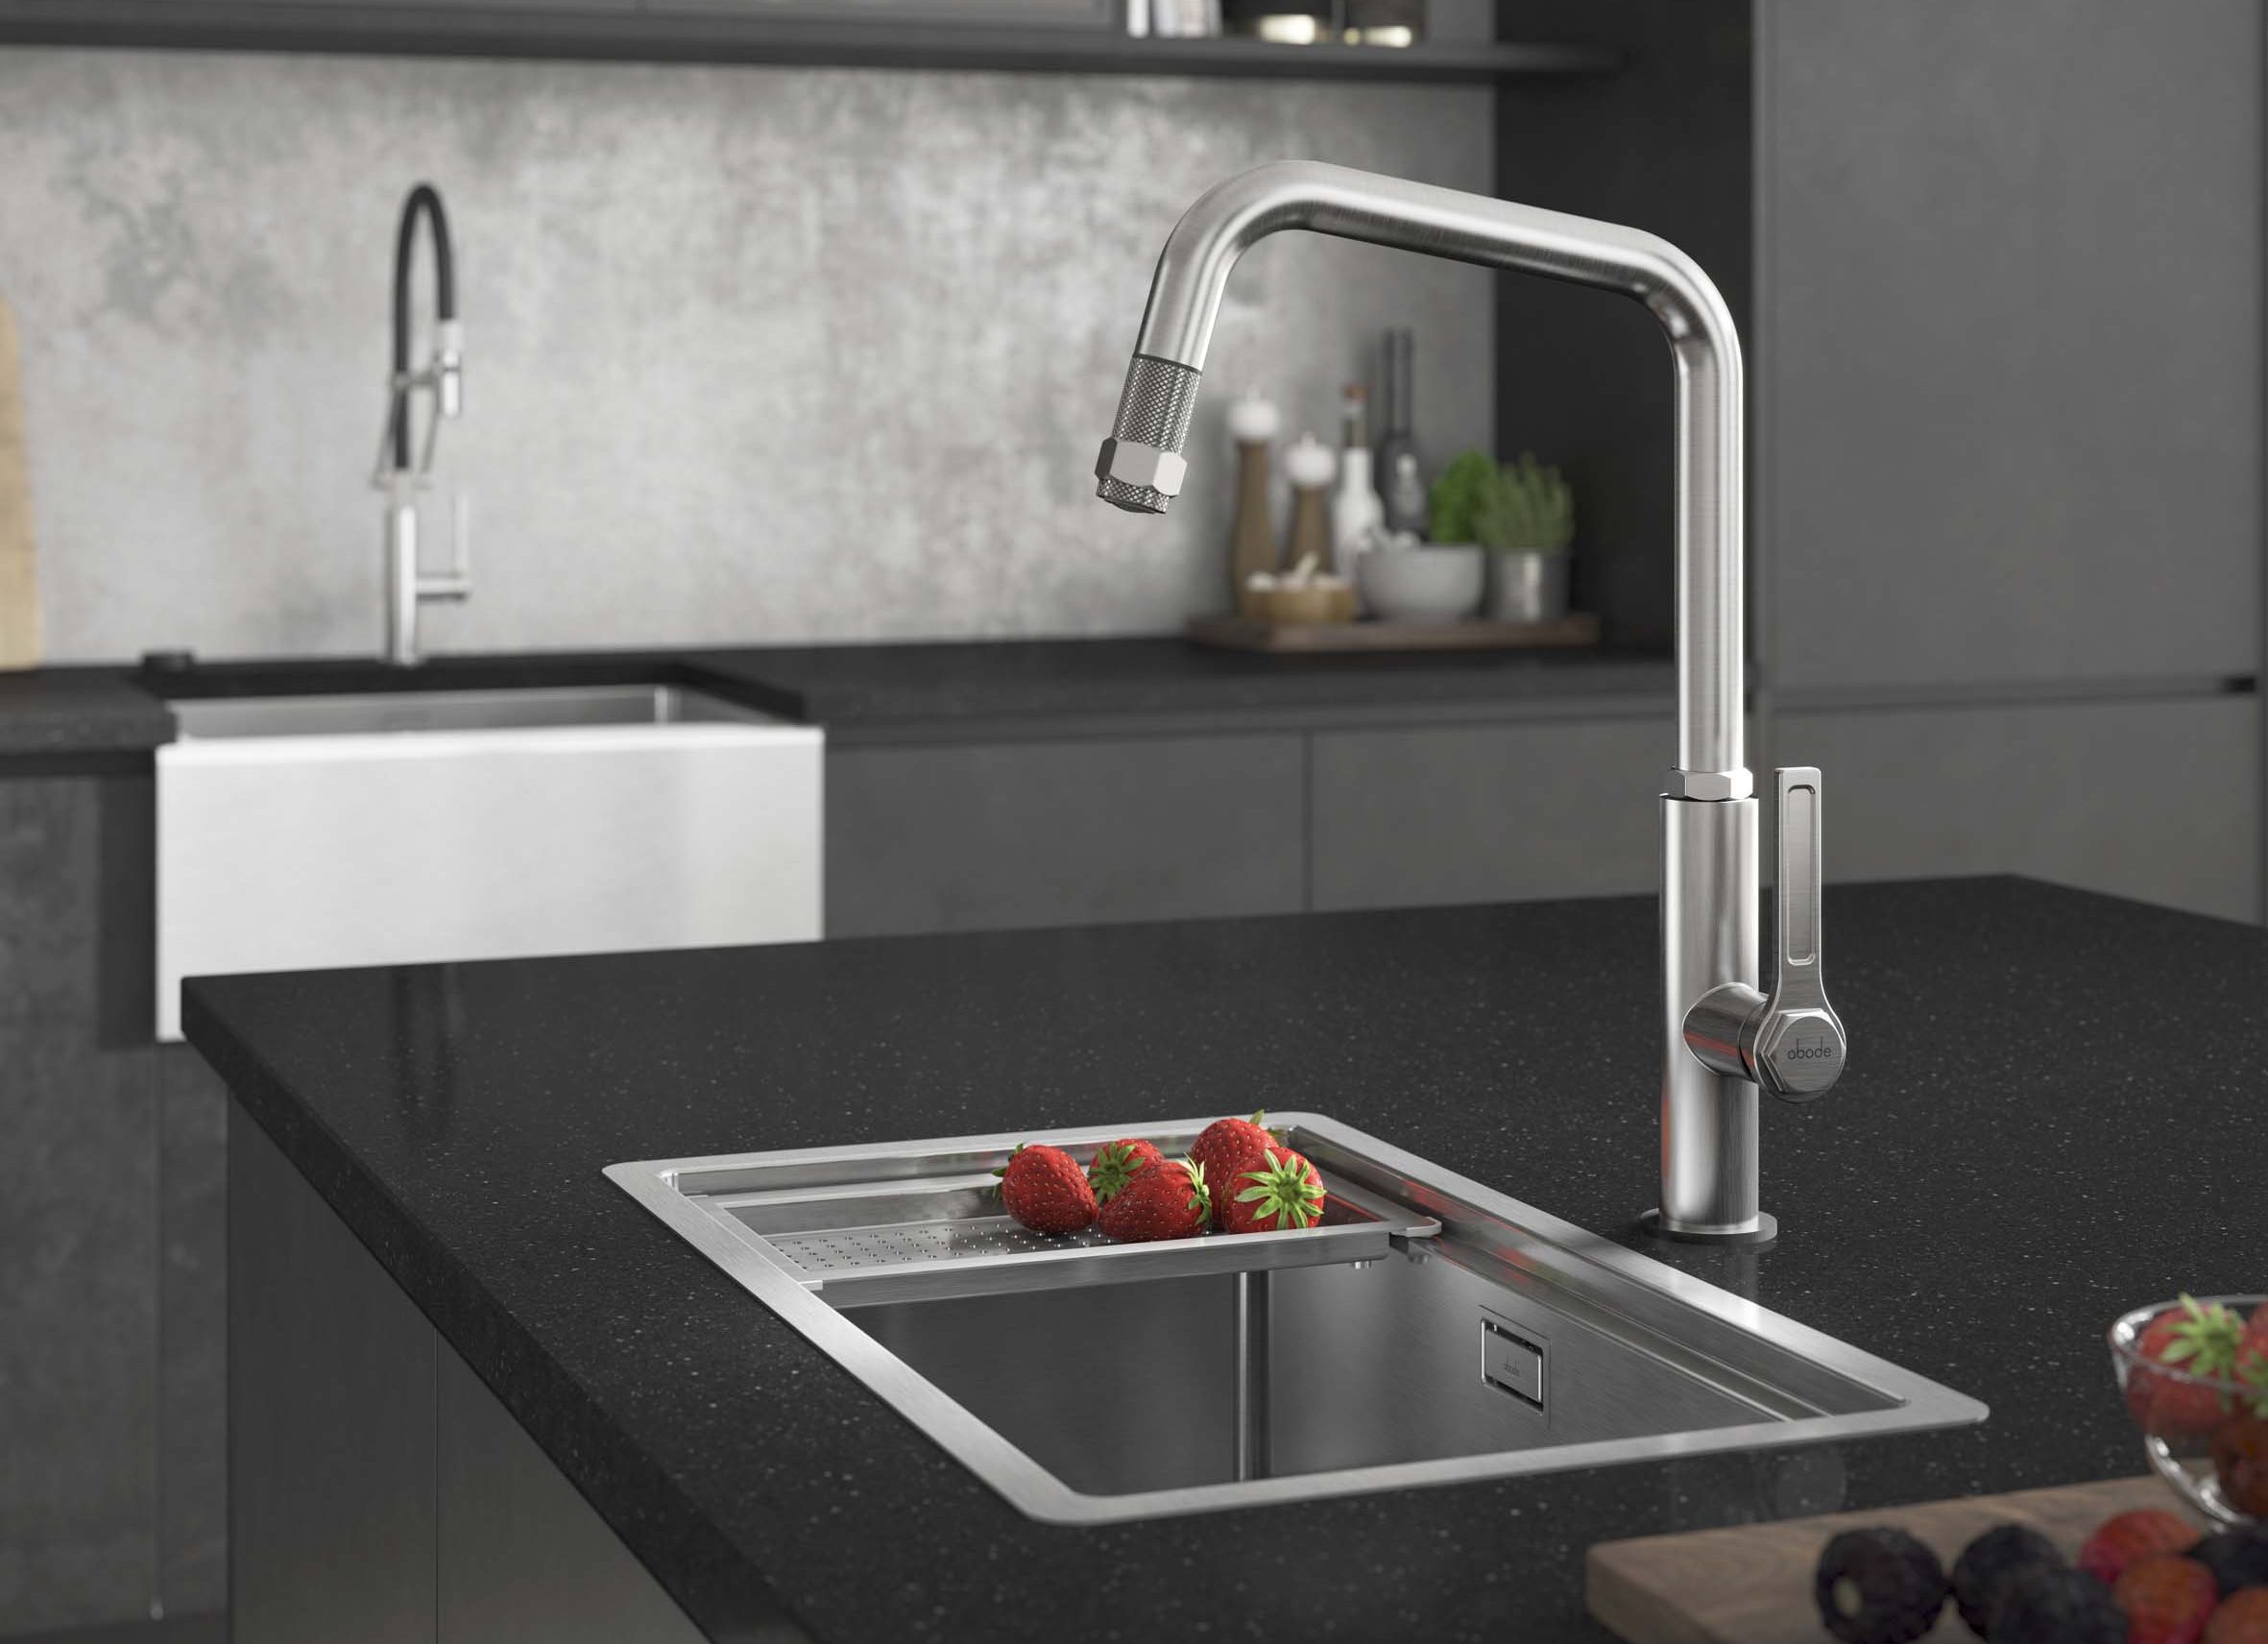 image showing how a pull out tap can help give you a more hygienic kitchen